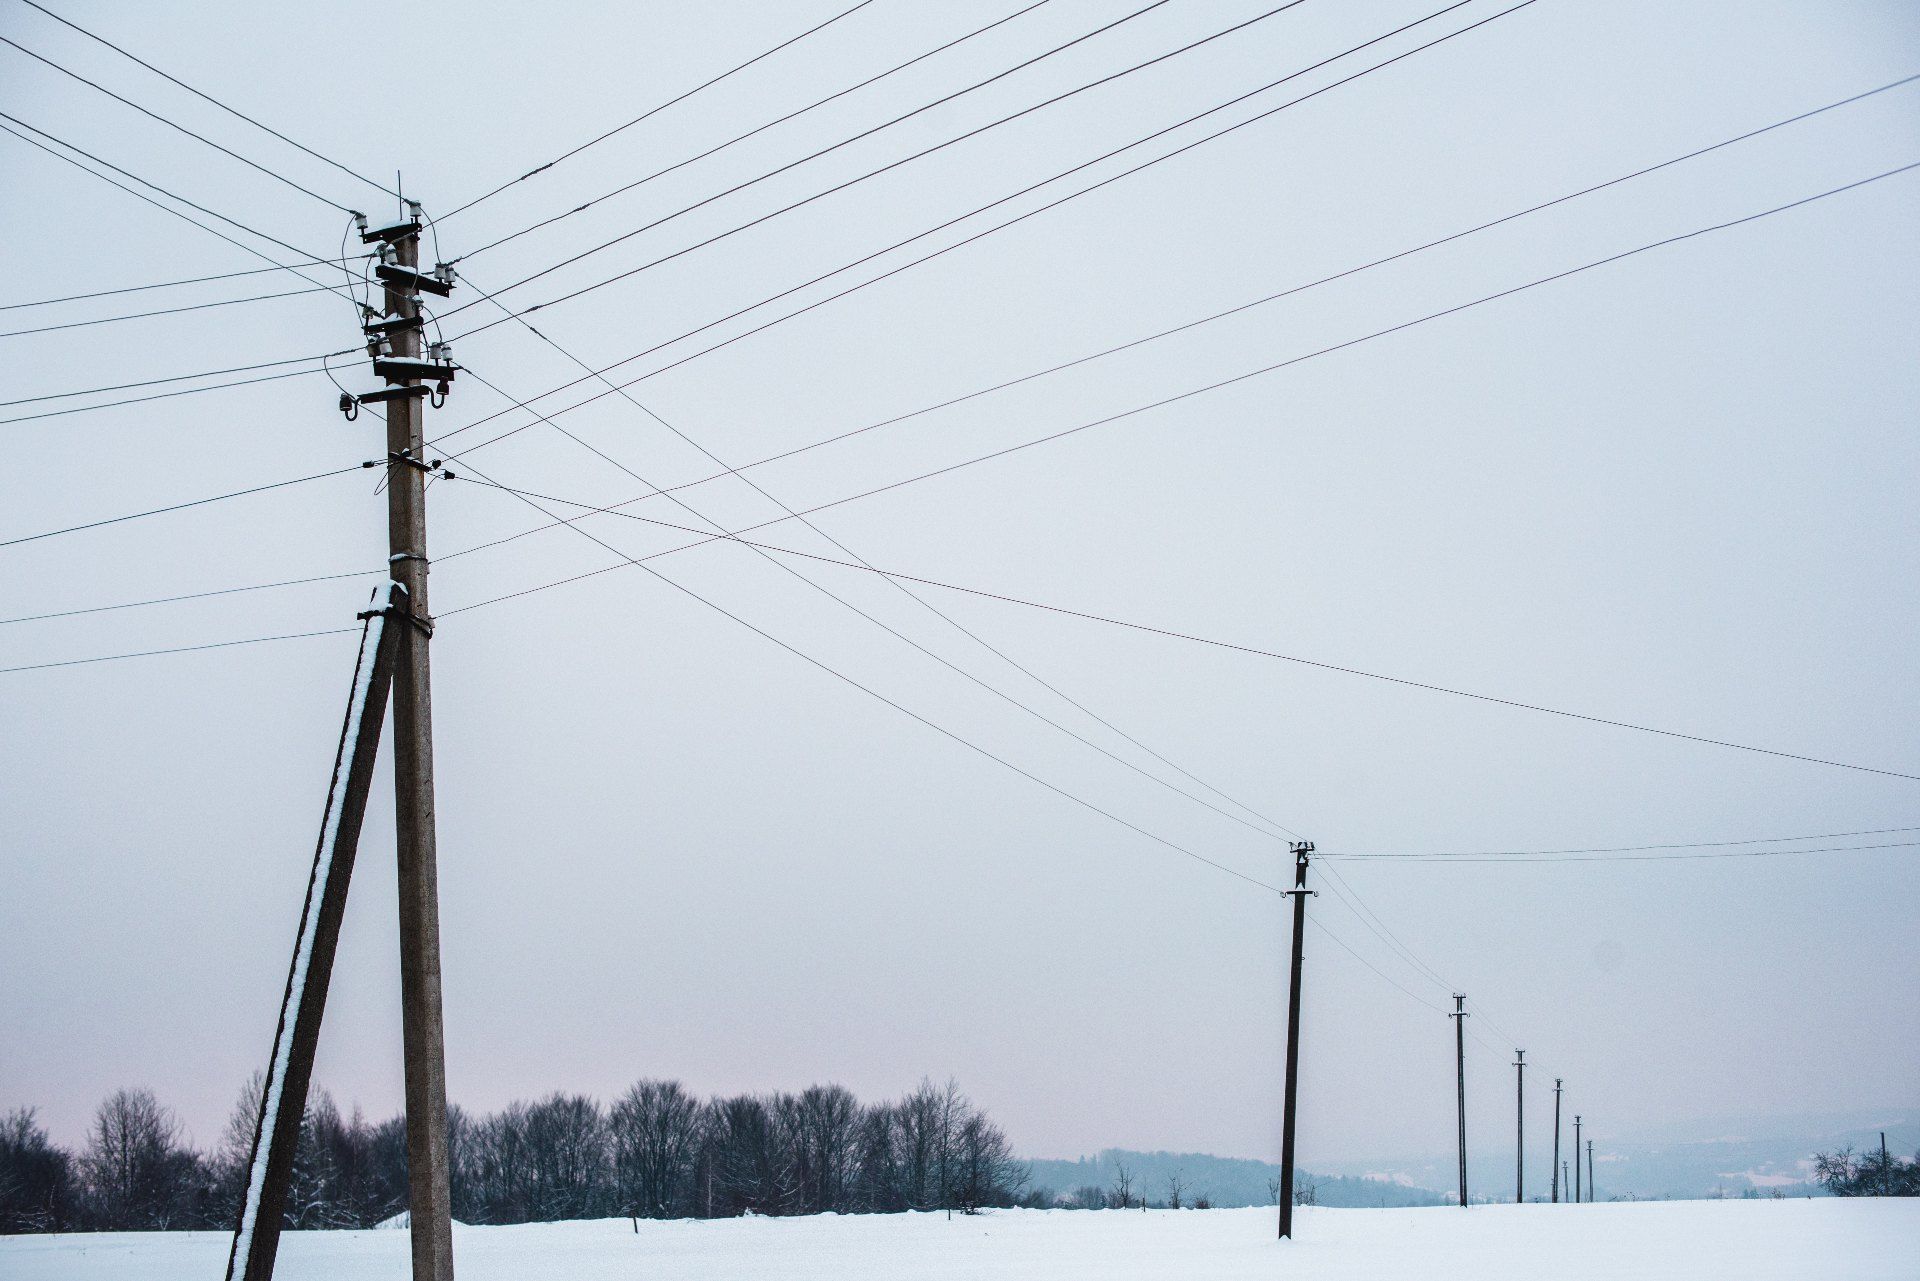 Power lines in the snow - Texas electric grid failure